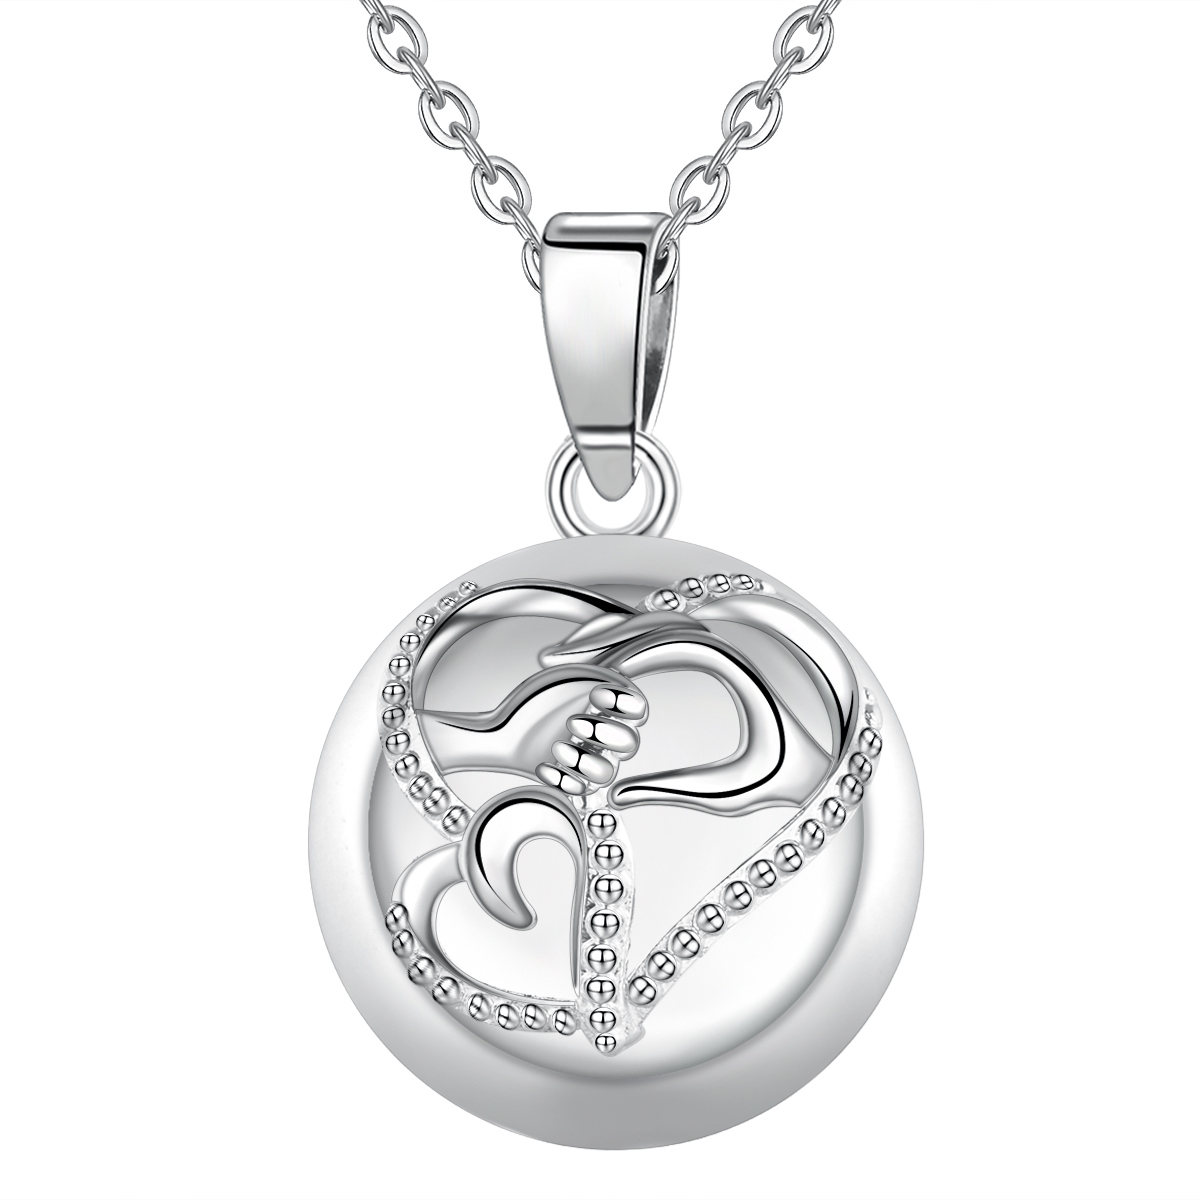 925 Sterling Silver Harmony Ball Pendant Necklace Pregnancy Chime Ball Jewelry